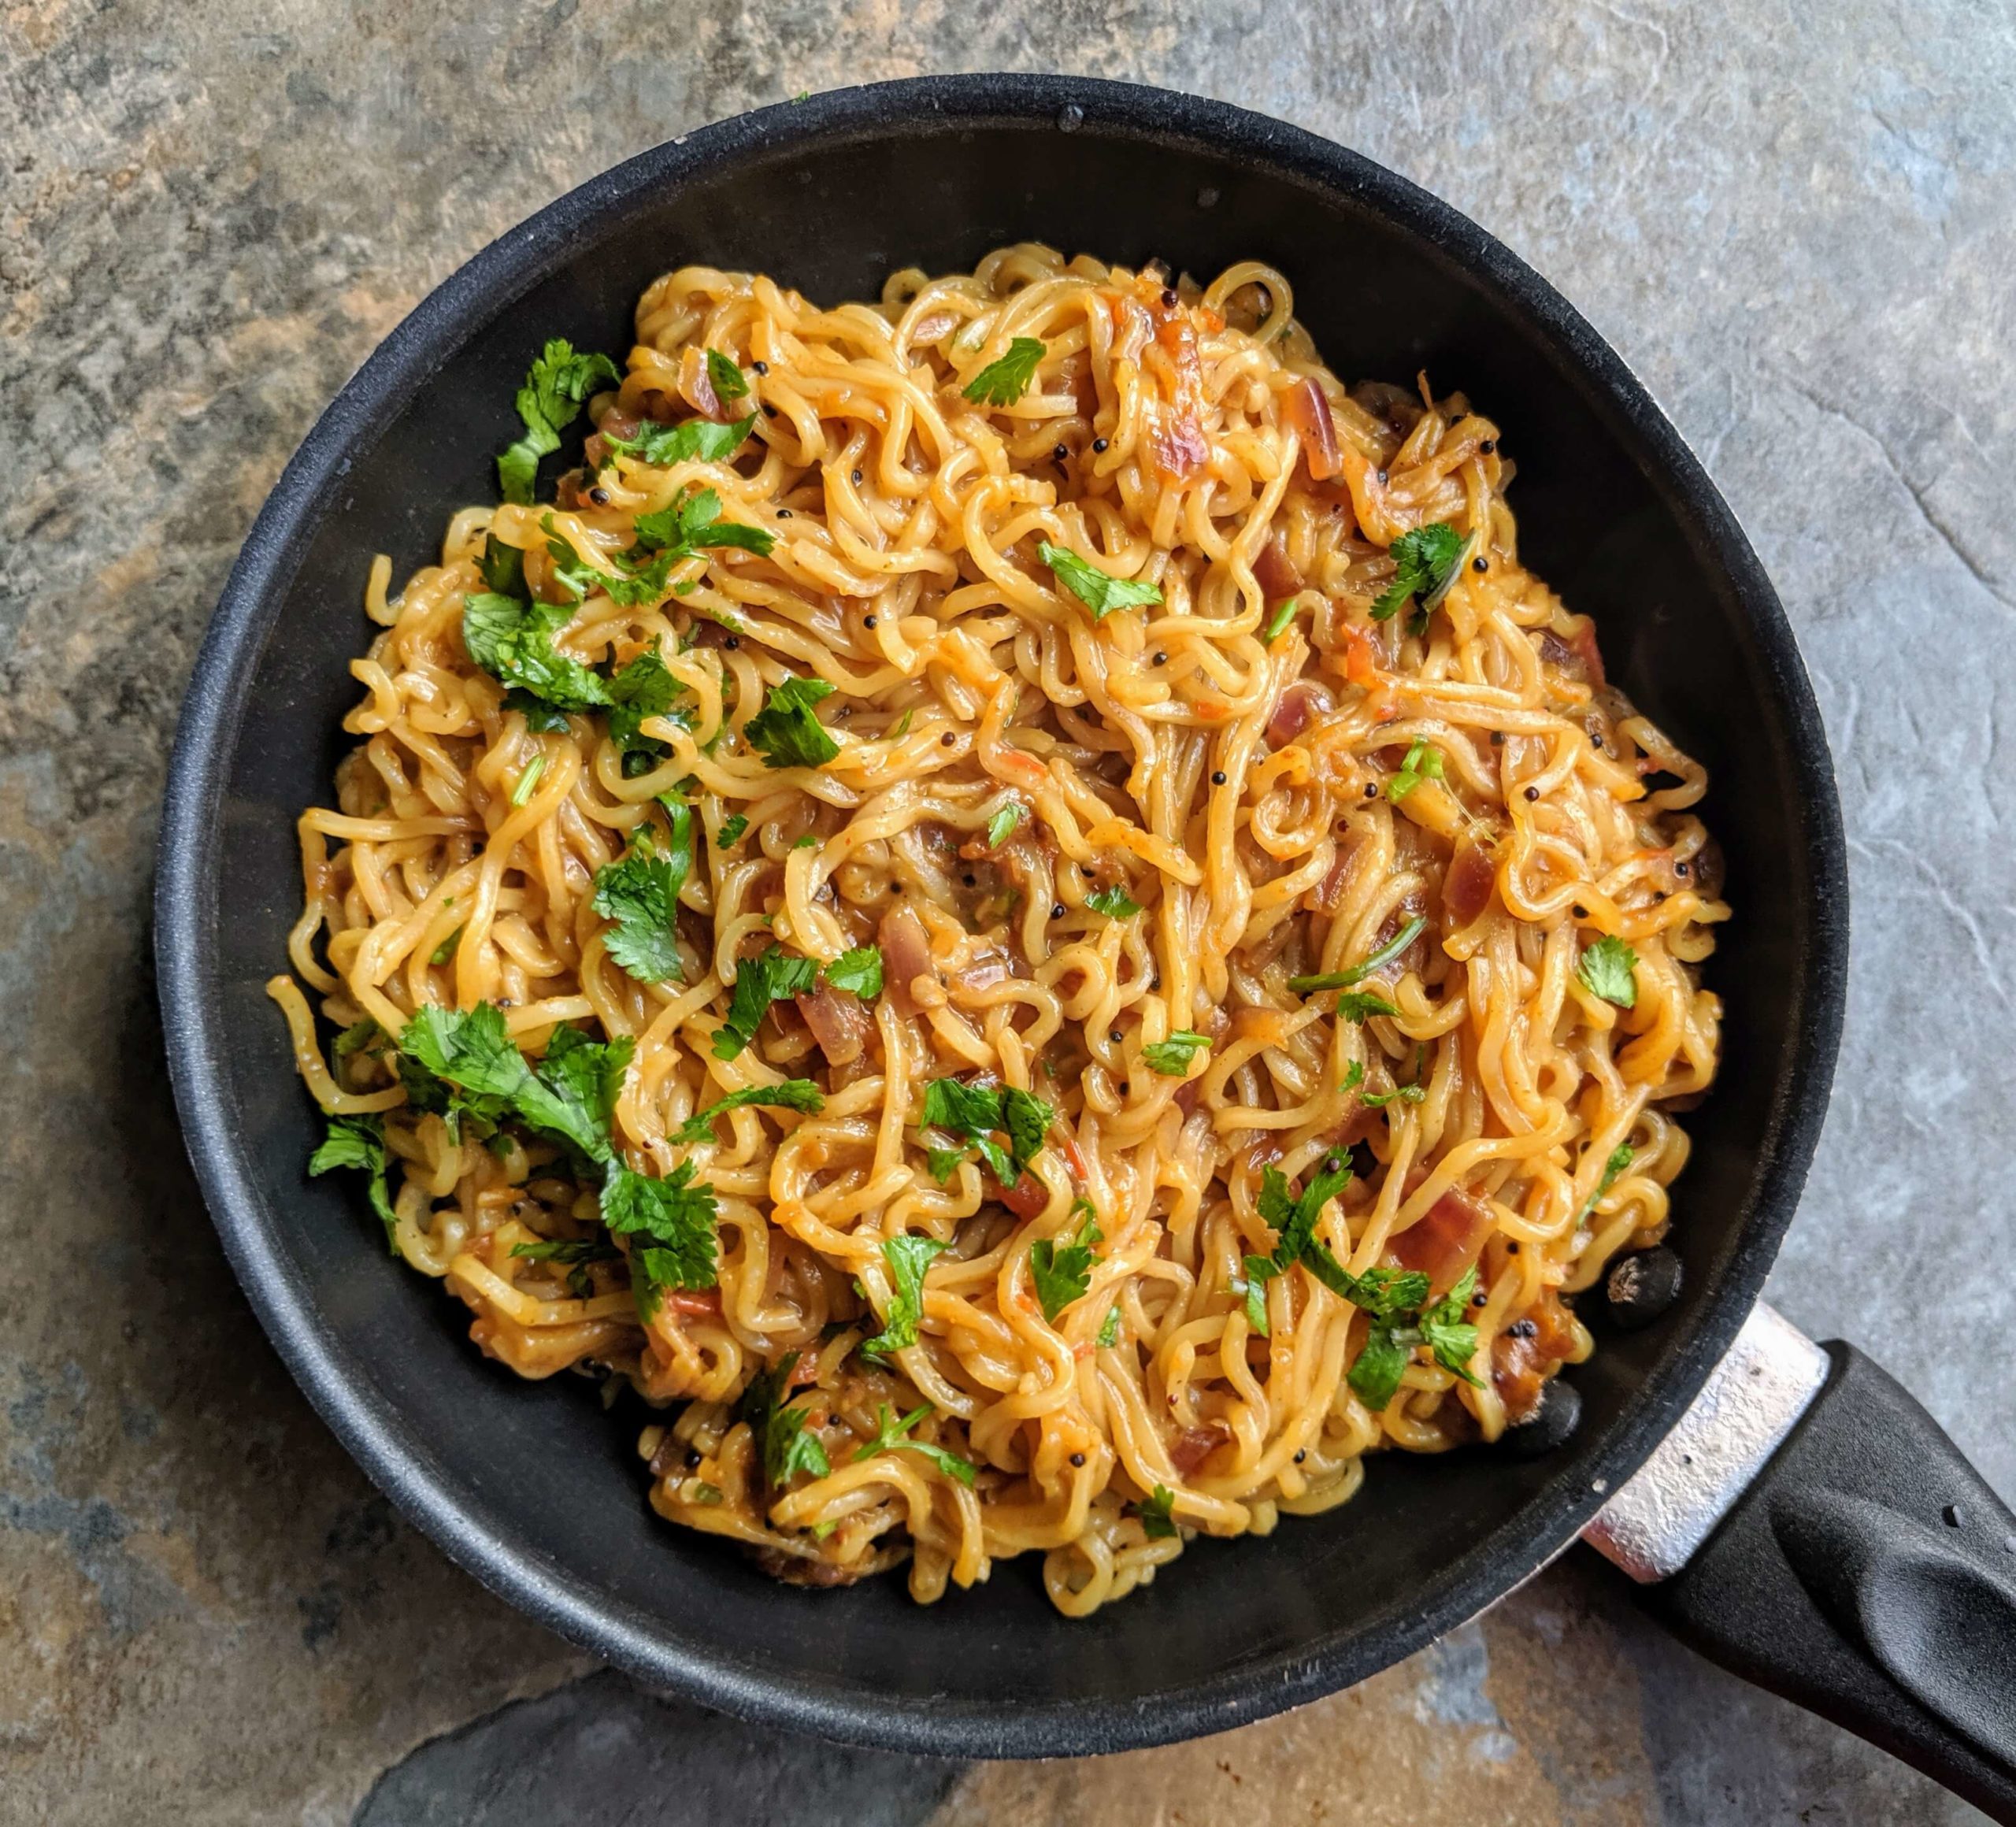 Street style maggi noodles are a spicy snack made by tossing maggi noodles in an onion tomato masala along with some spices.